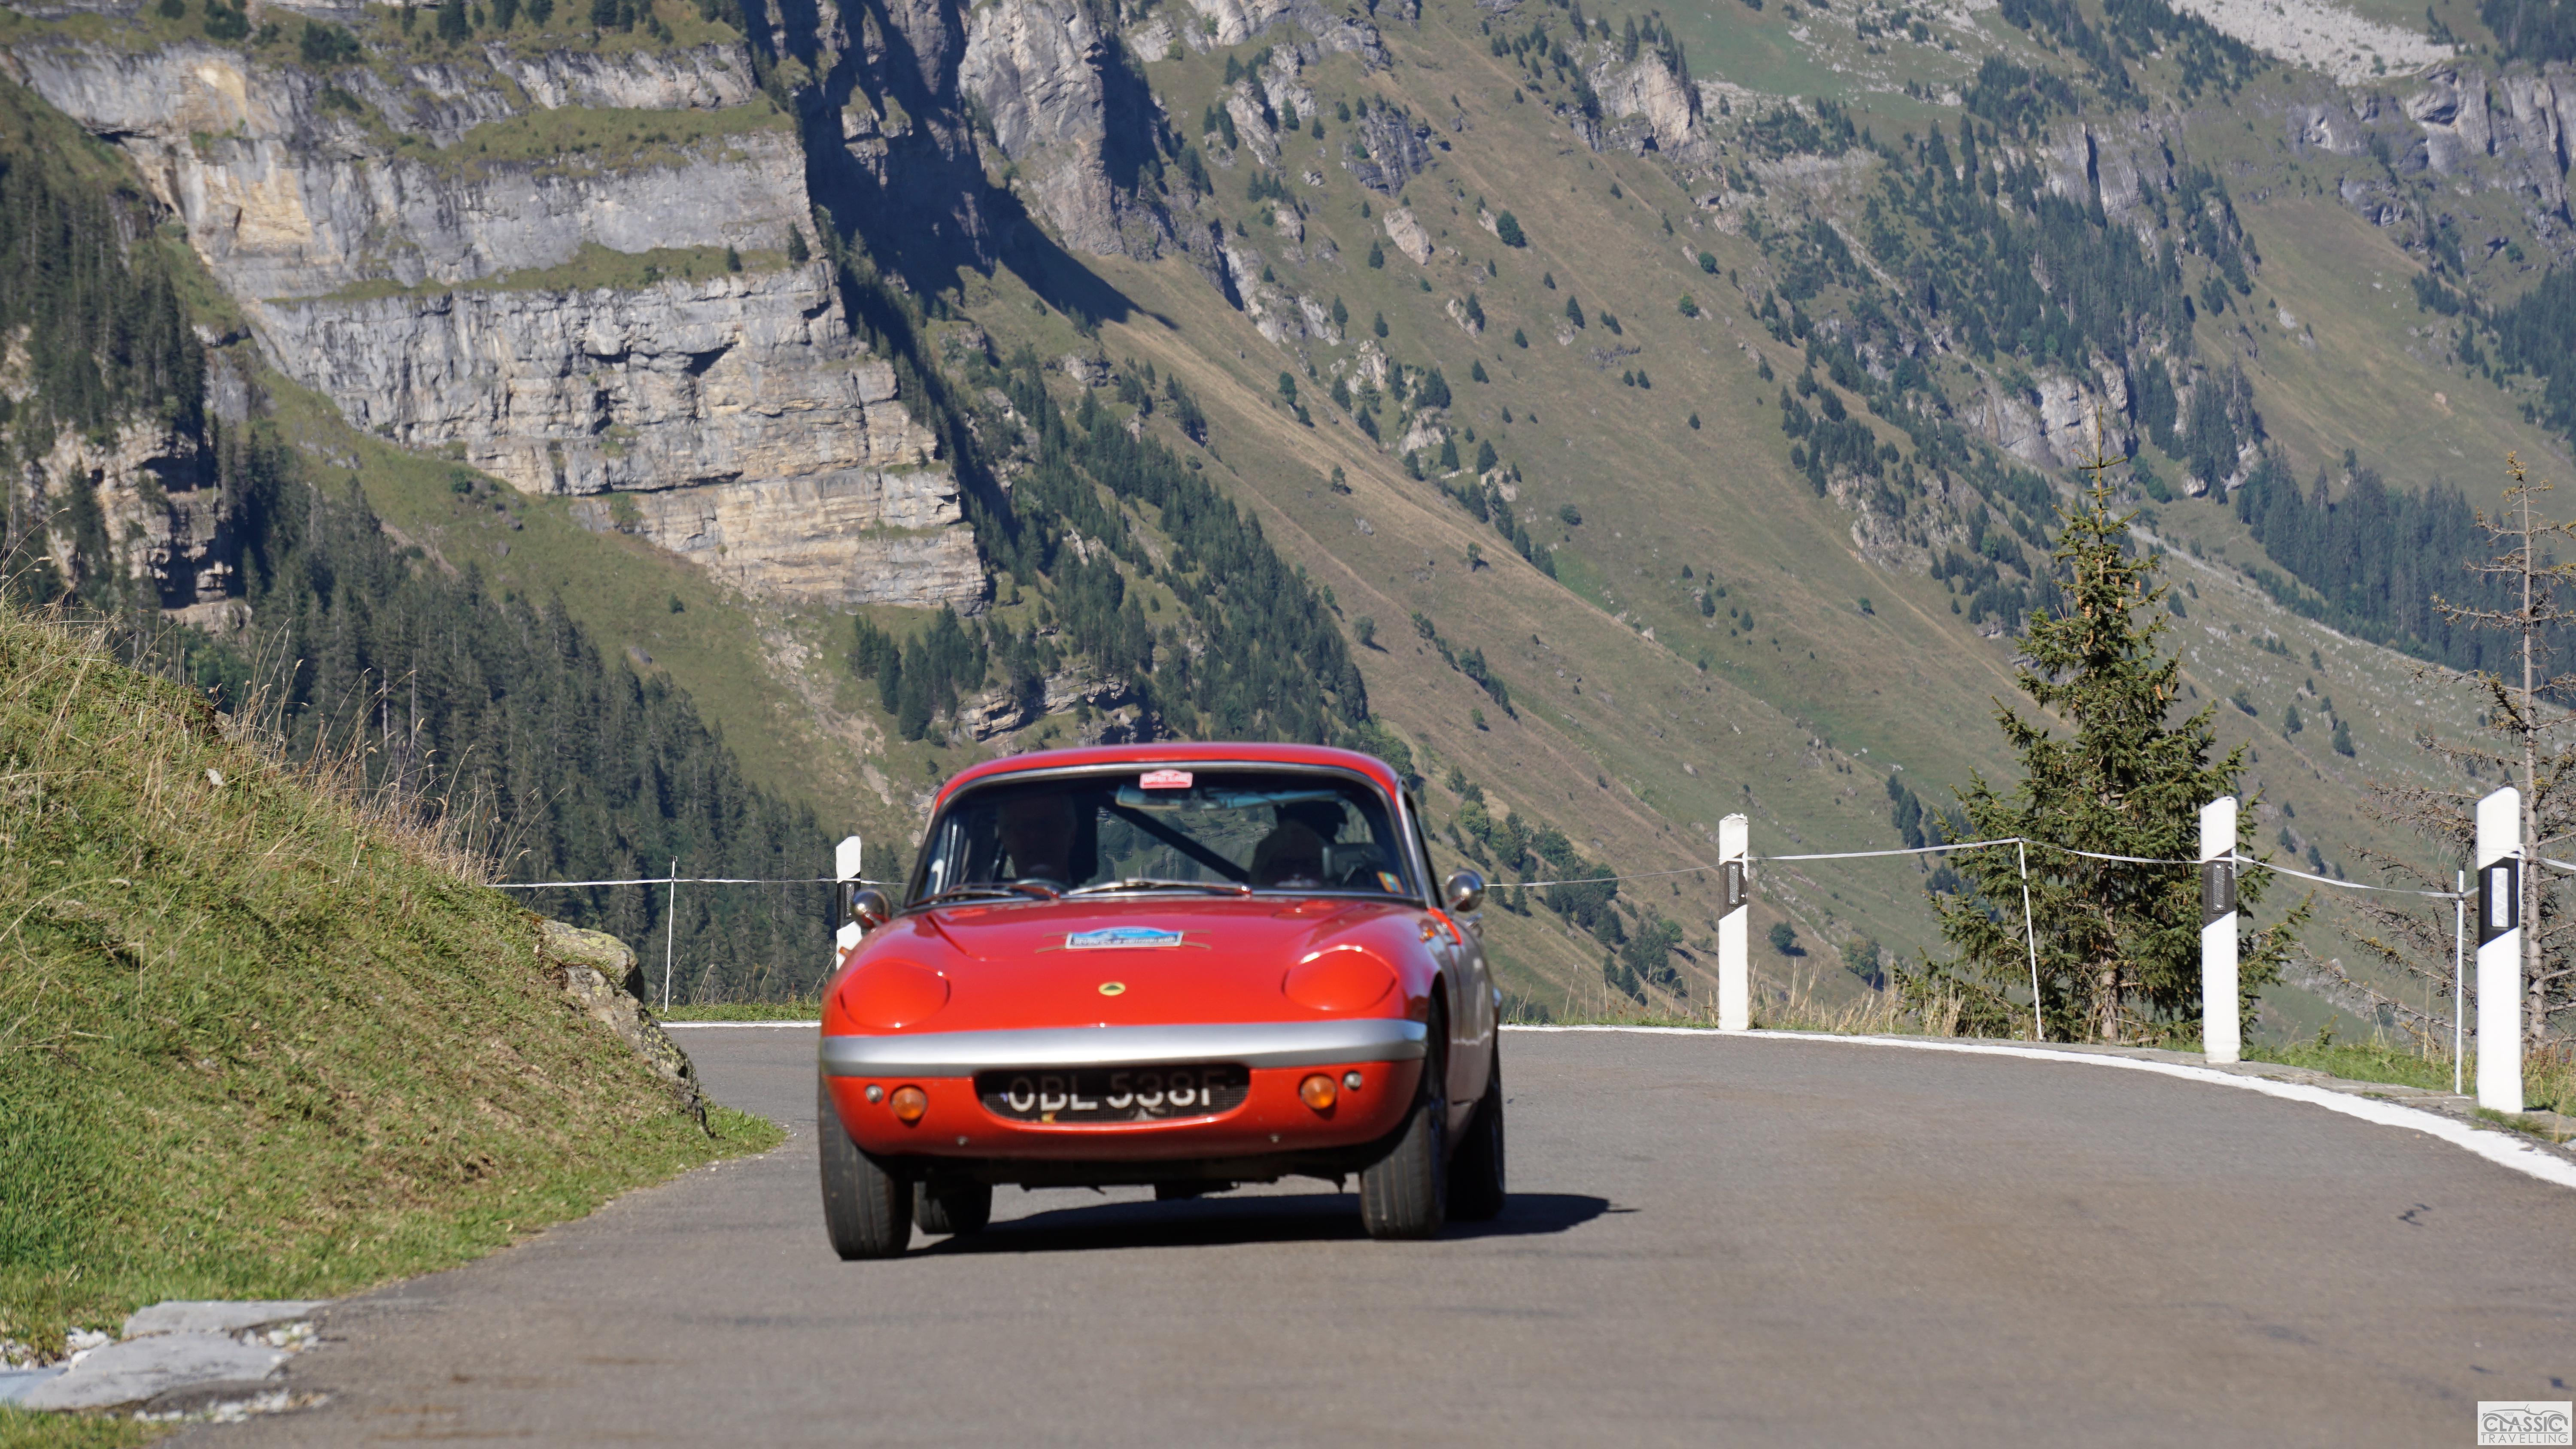 Lotus in the Alps